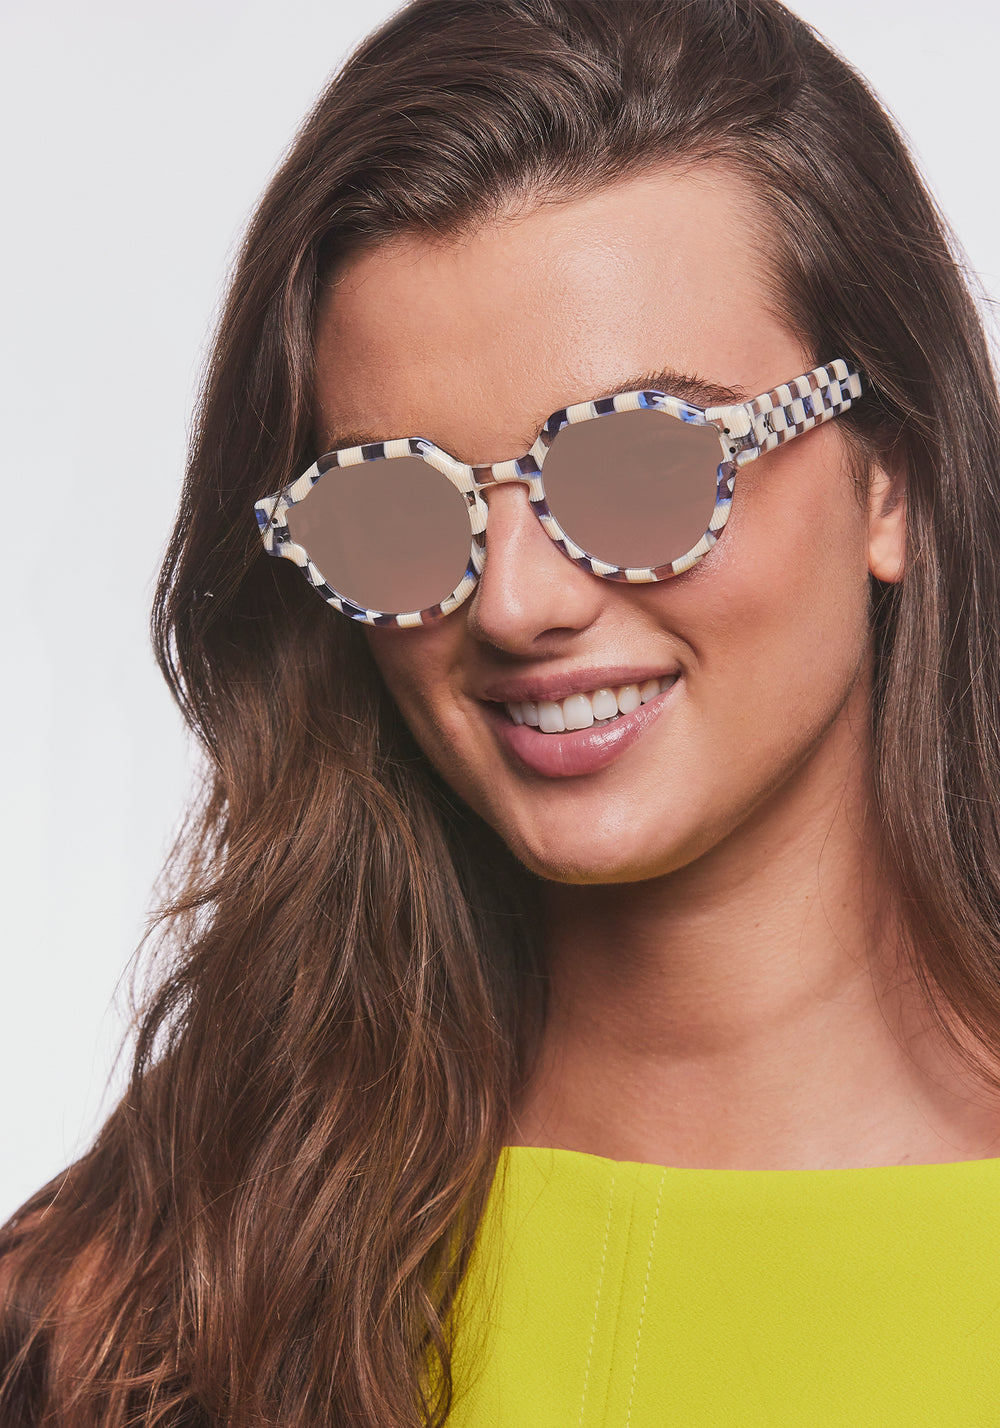 KREWE - ASTOR | Gingham Mirrored Handcrafted, luxury blue and white checkered sunglasses womens model | Model: Bentley